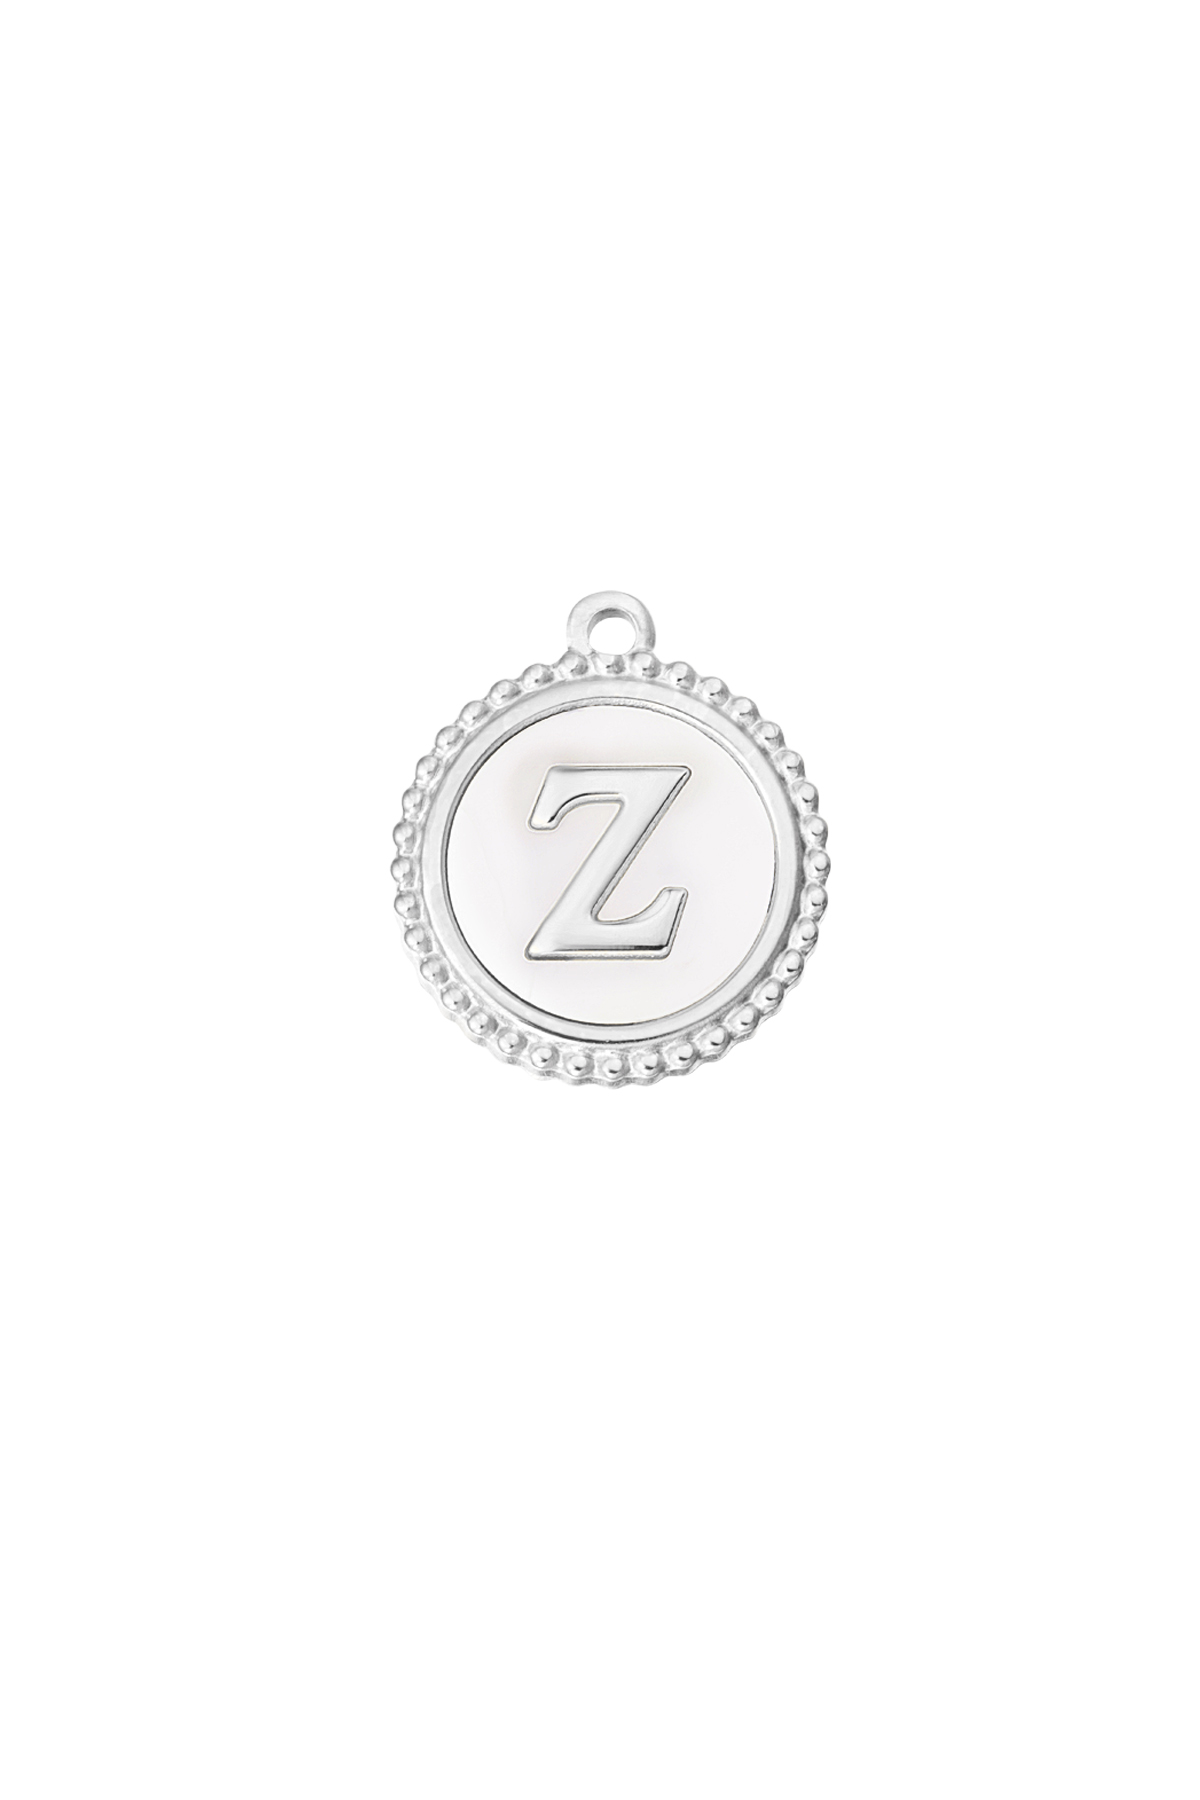 Silver / Charm graceful Z - white/silver Picture51